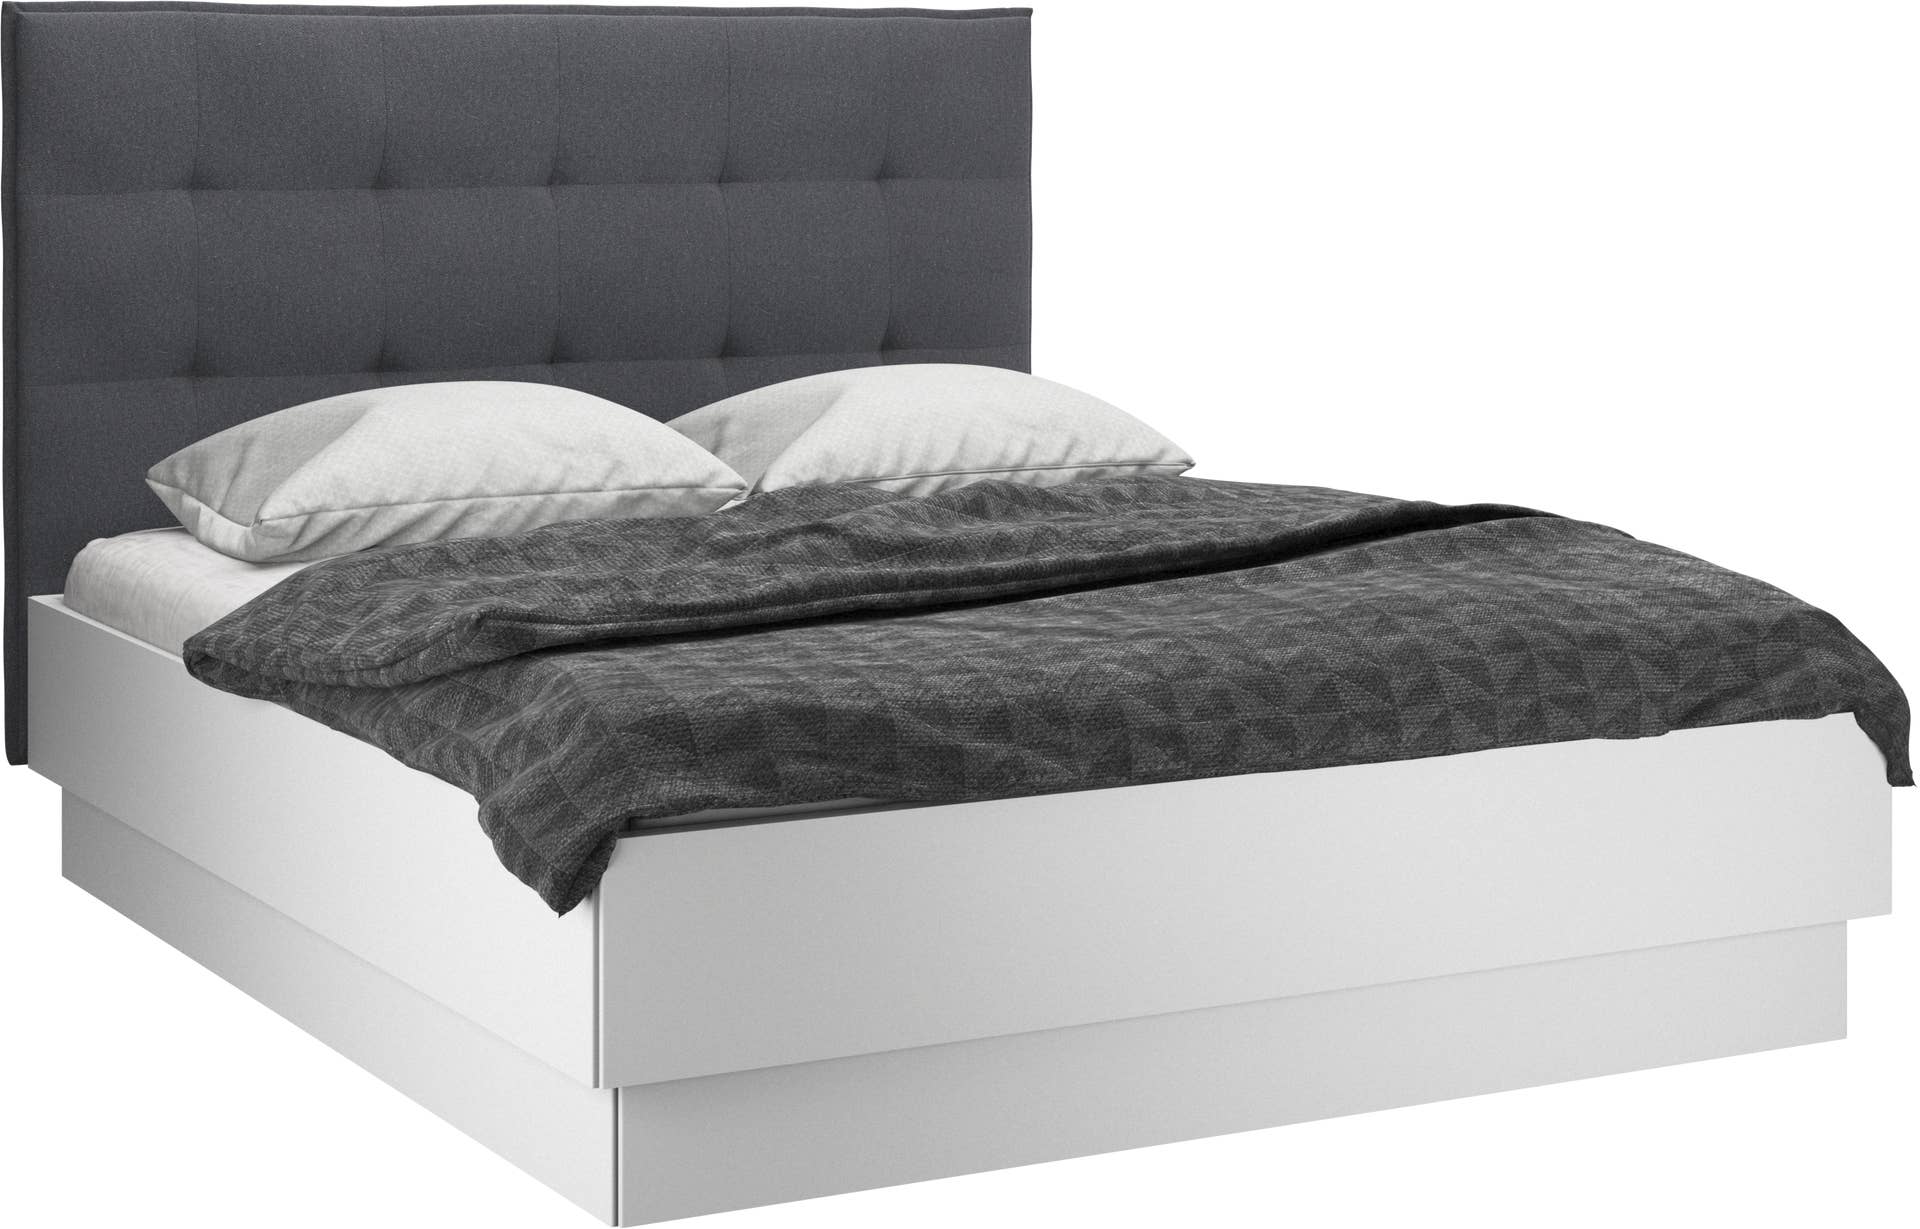 Lugano storage bed with lift-up frame and slats, excl. mattress | BoConcept